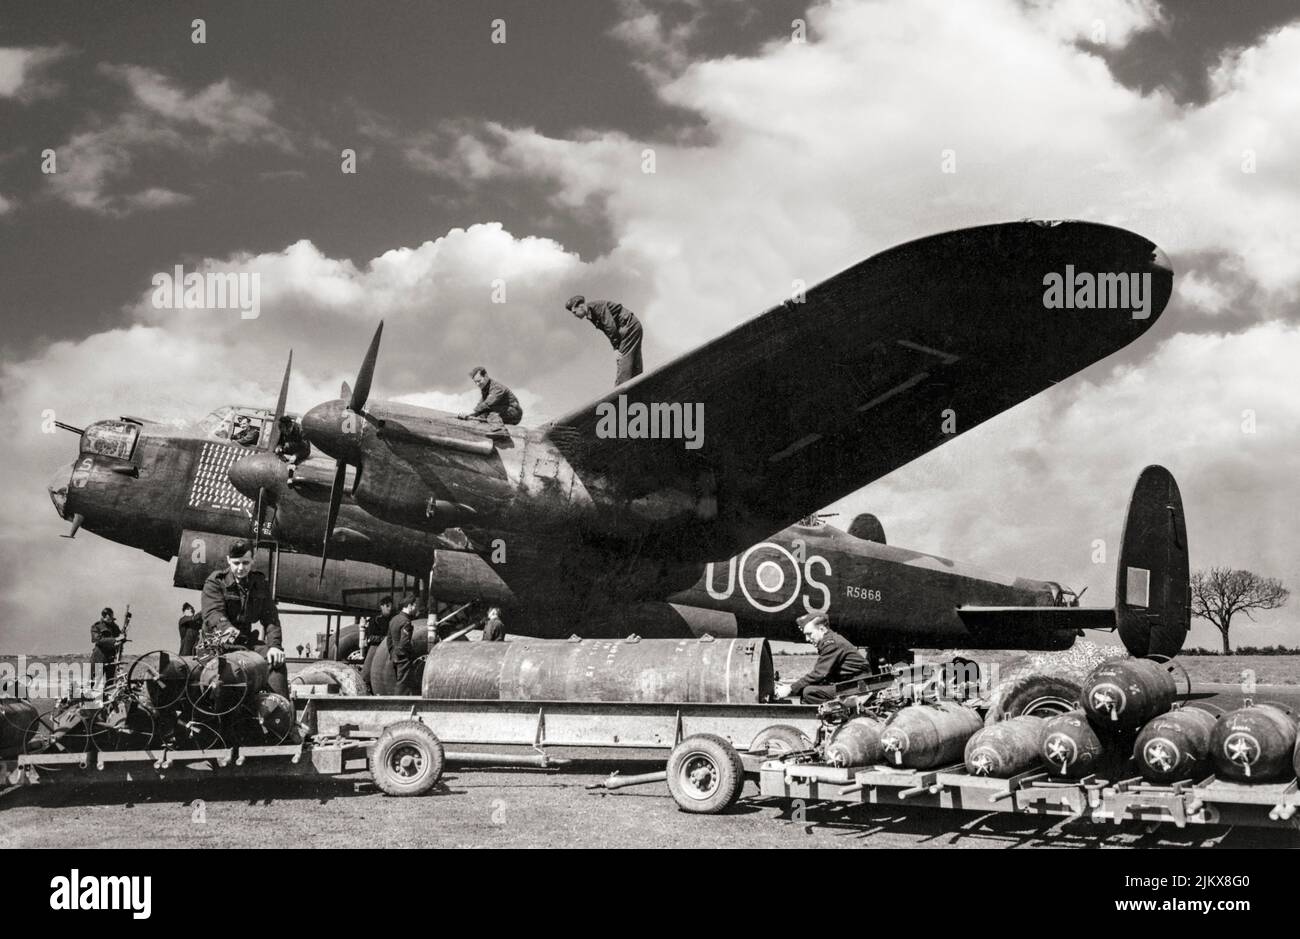 The veteran Avro Lancaster bomber 'S for Sugar', of No 467 Squadron, Royal Australian Air Force, is prepared for its 97th operational sortie at RAF Waddington, Lincolnshire, England. The 'Lancs' first saw service with RAF Bomber Command in 1942 and as the strategic bombing offensive over Europe gathered momentum, it became the main aircraft for the night-time bombing campaigns that followed. Stock Photo